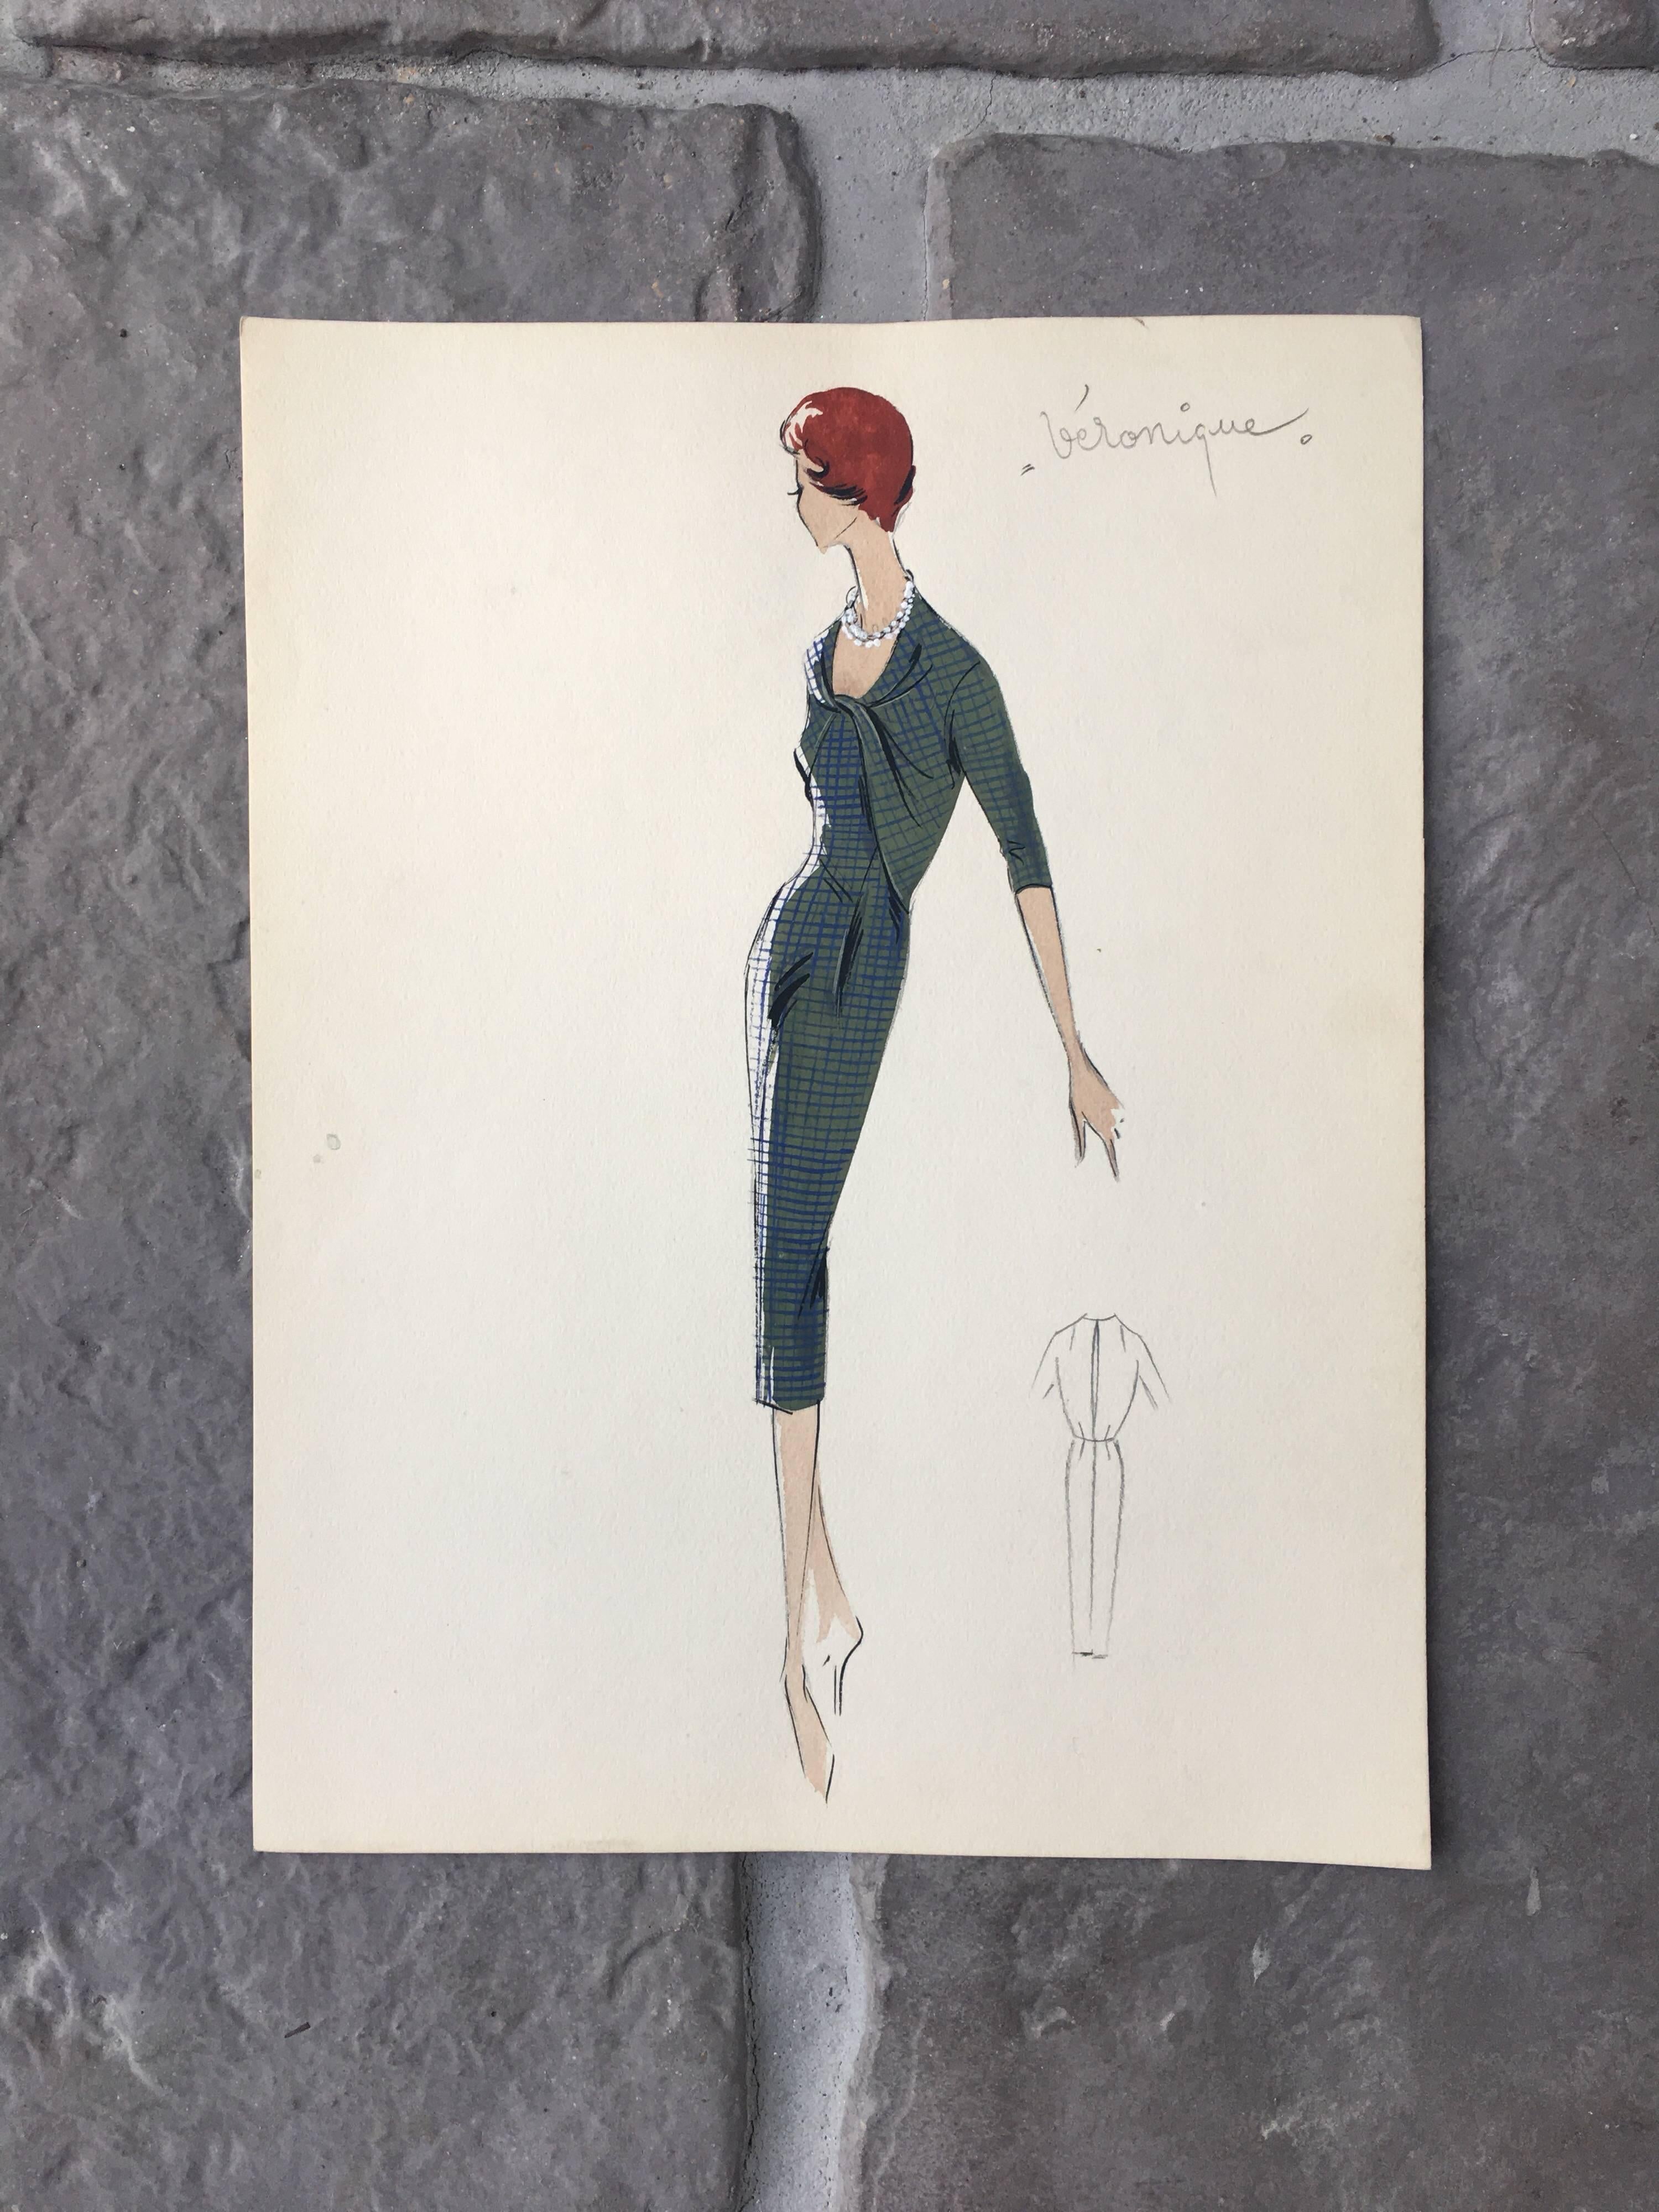 Lady in Elegant 1950's Green Check Dress Parisian Fashion Illustration Sketch - Painting by Unknown